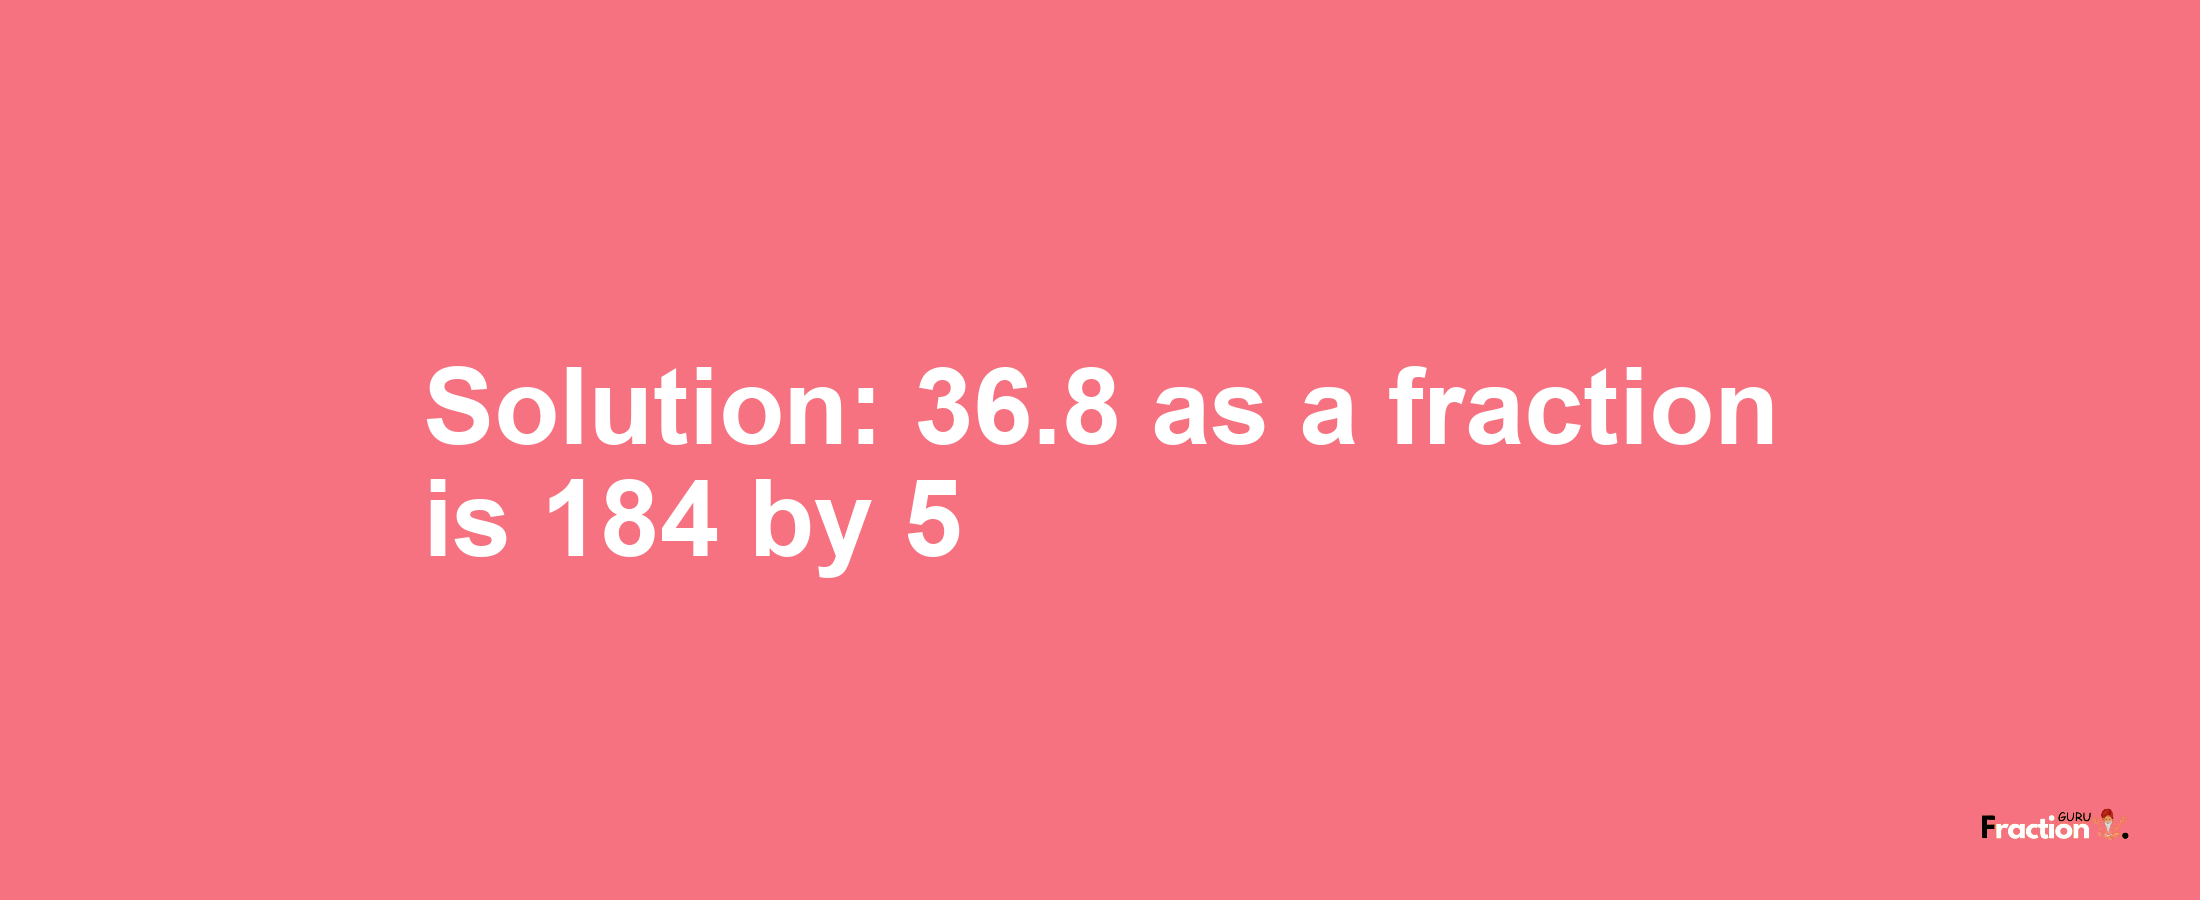 Solution:36.8 as a fraction is 184/5